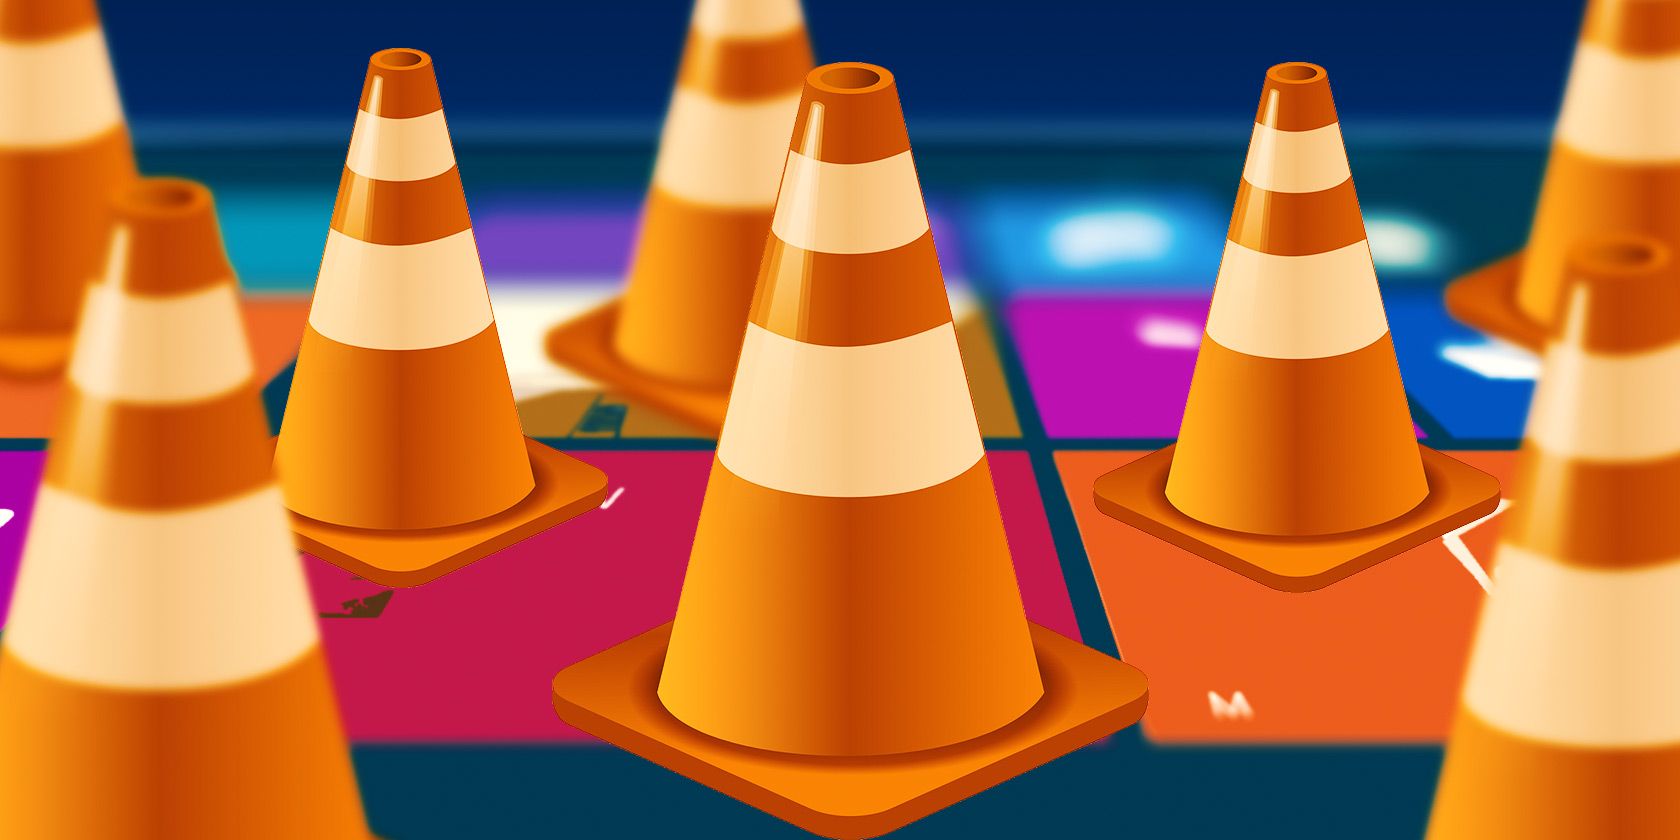 vlc download for ipad